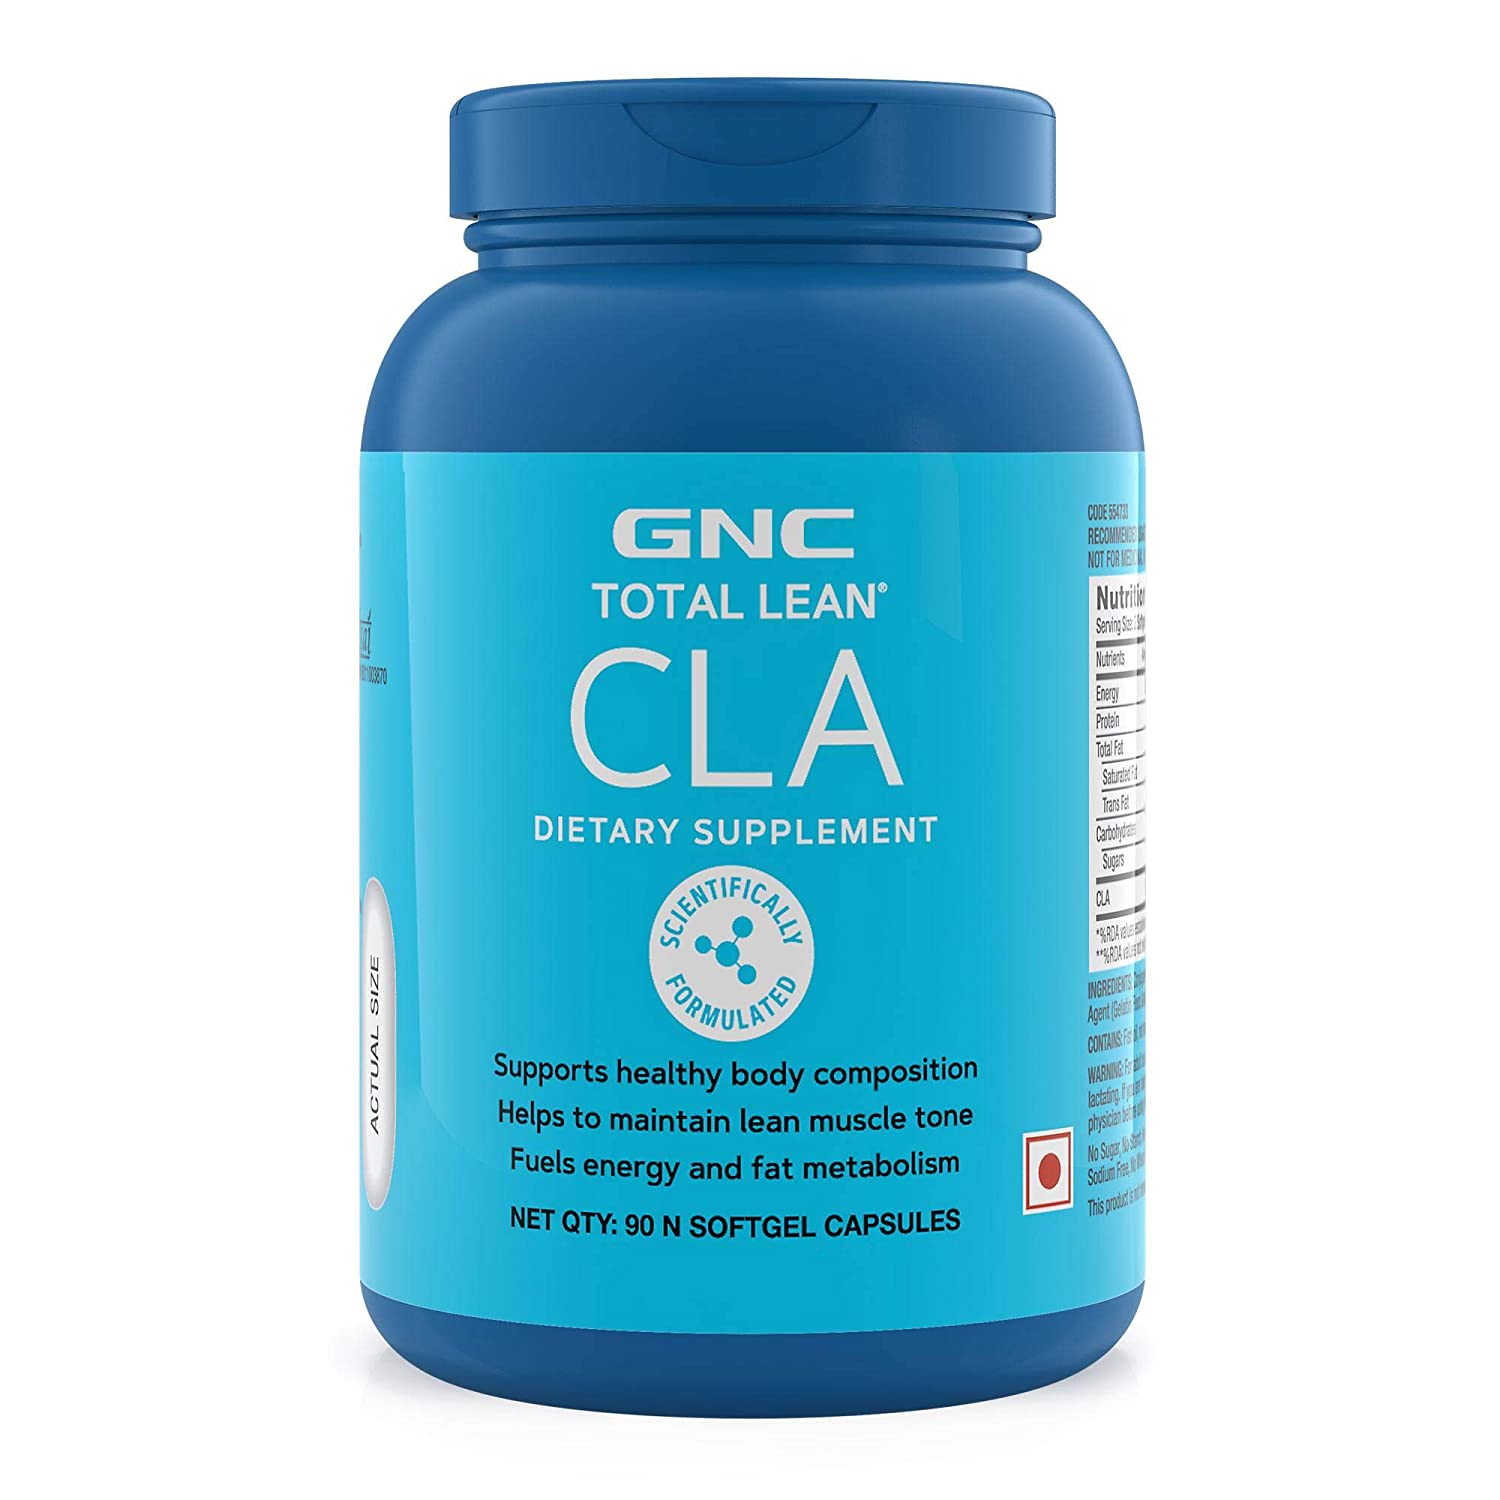 Image Of Gnc Total Lean Cla, 90 Softgel Capsules, Unflavoured Beast Nutrition